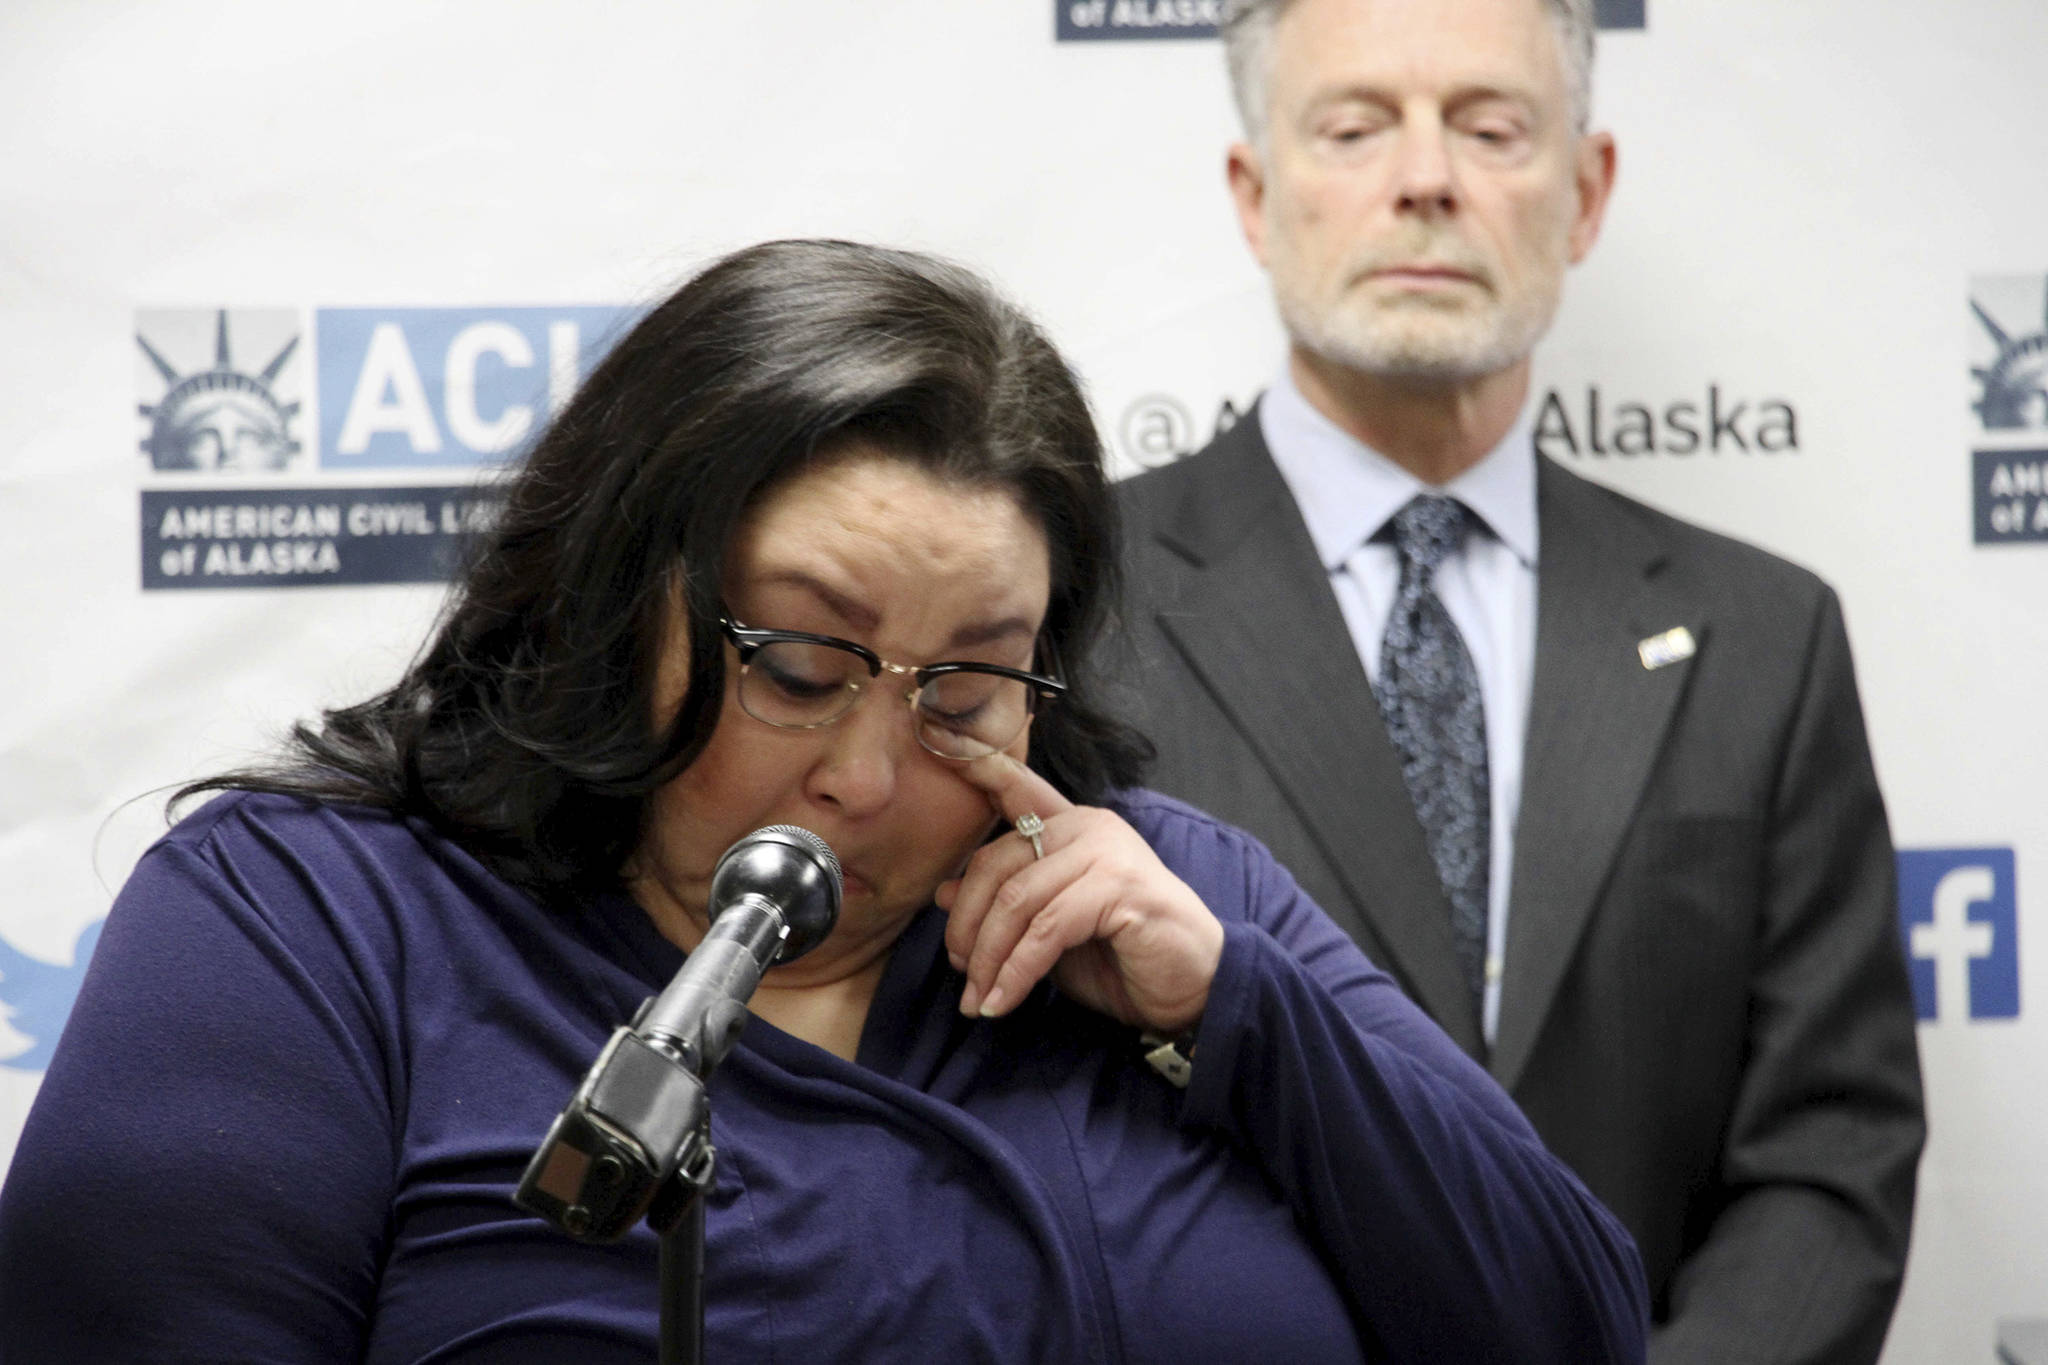 Clarice Hardy wipes a tear away from her eye during a news conference Thursday in Anchorage. The American Civil Liberties Union of Alaska filed a lawsuit Thursday on Hardy’s behalf against the City of Nome and two former officers for failing to investigate the sexual assault report filed by Hardy, a former police dispatcher. On the right is Stephen Koteff, the ACLU’s legal director in Alaska. (AP Photo | Mark Thiessen)